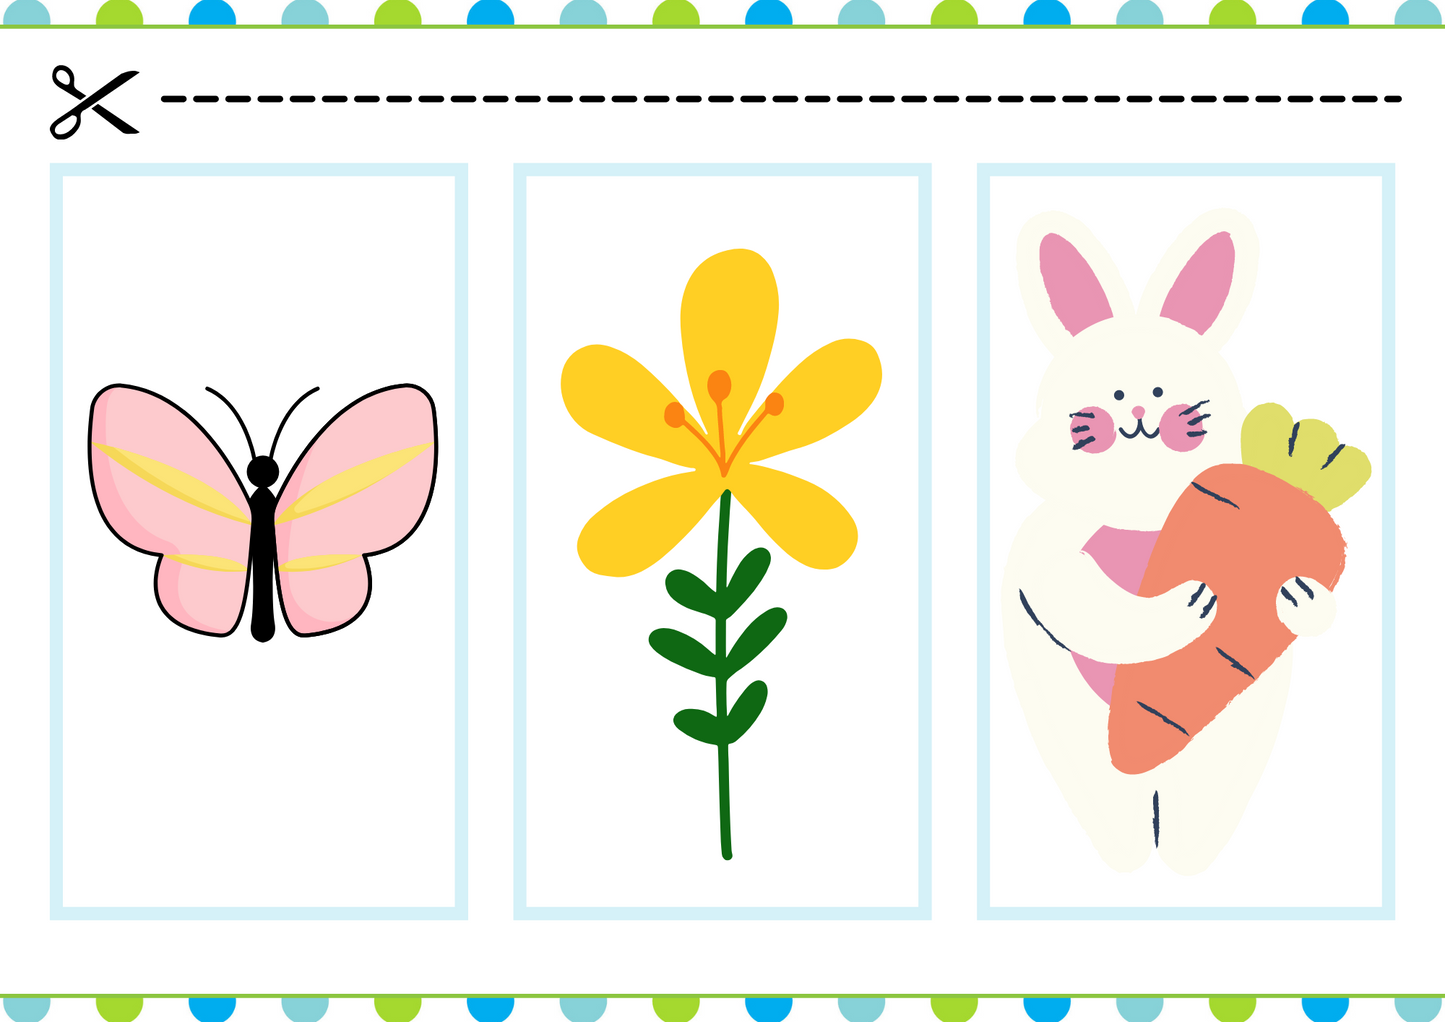 Spring Busy Book for Preschoolers (48 Pages)